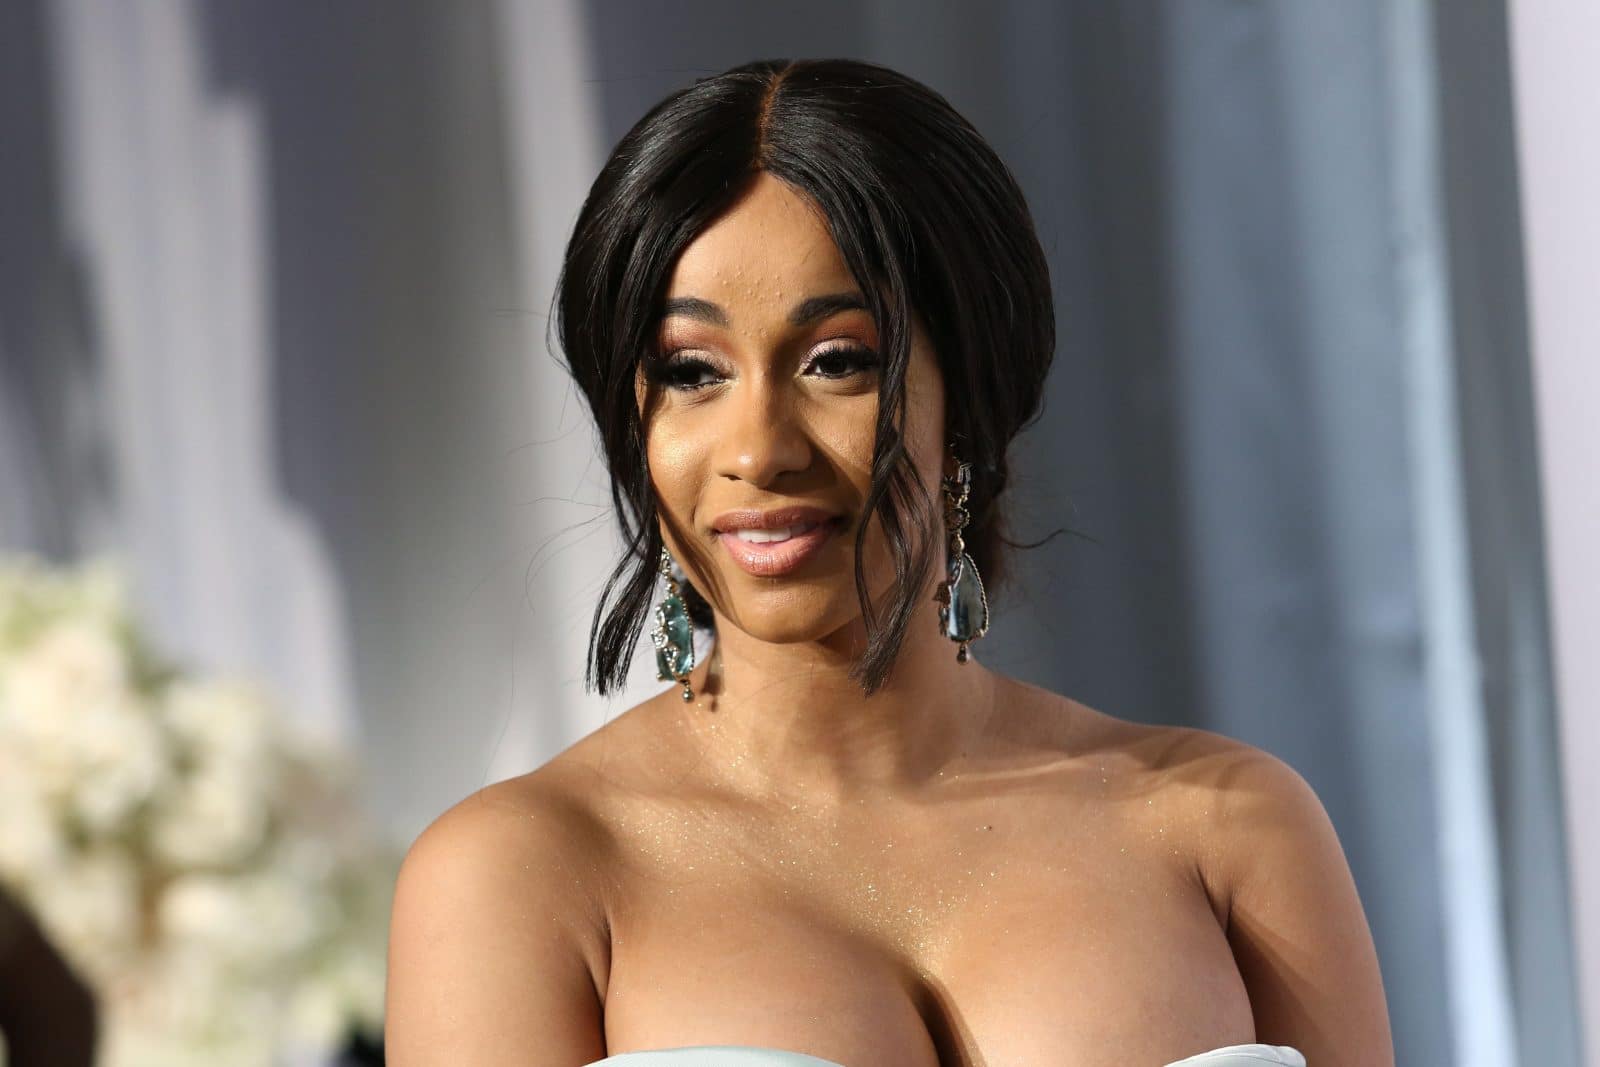 Cardi B First Female Rapper to Land Two Number One Singles